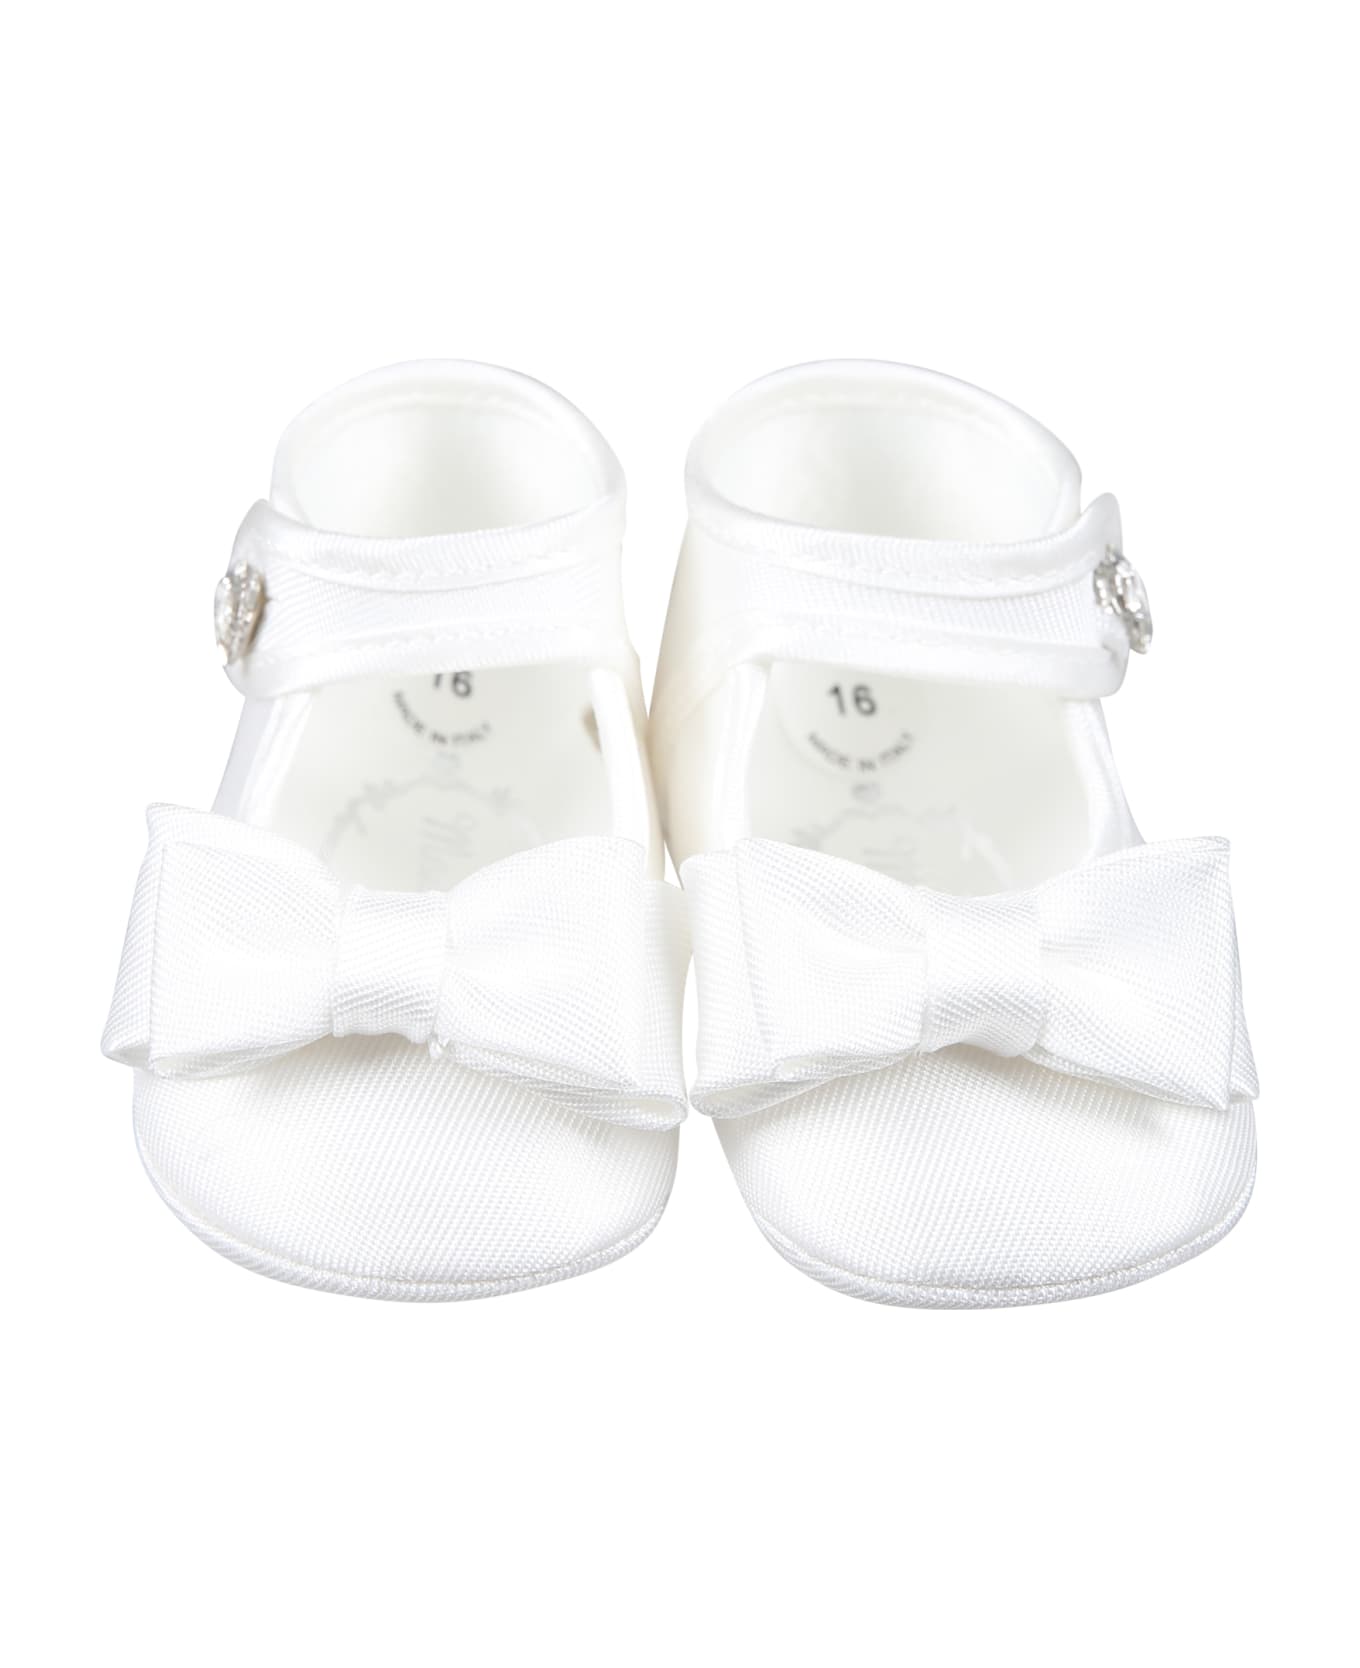 Monnalisa White Flat Shoes For Baby Girl With Bow - White シューズ